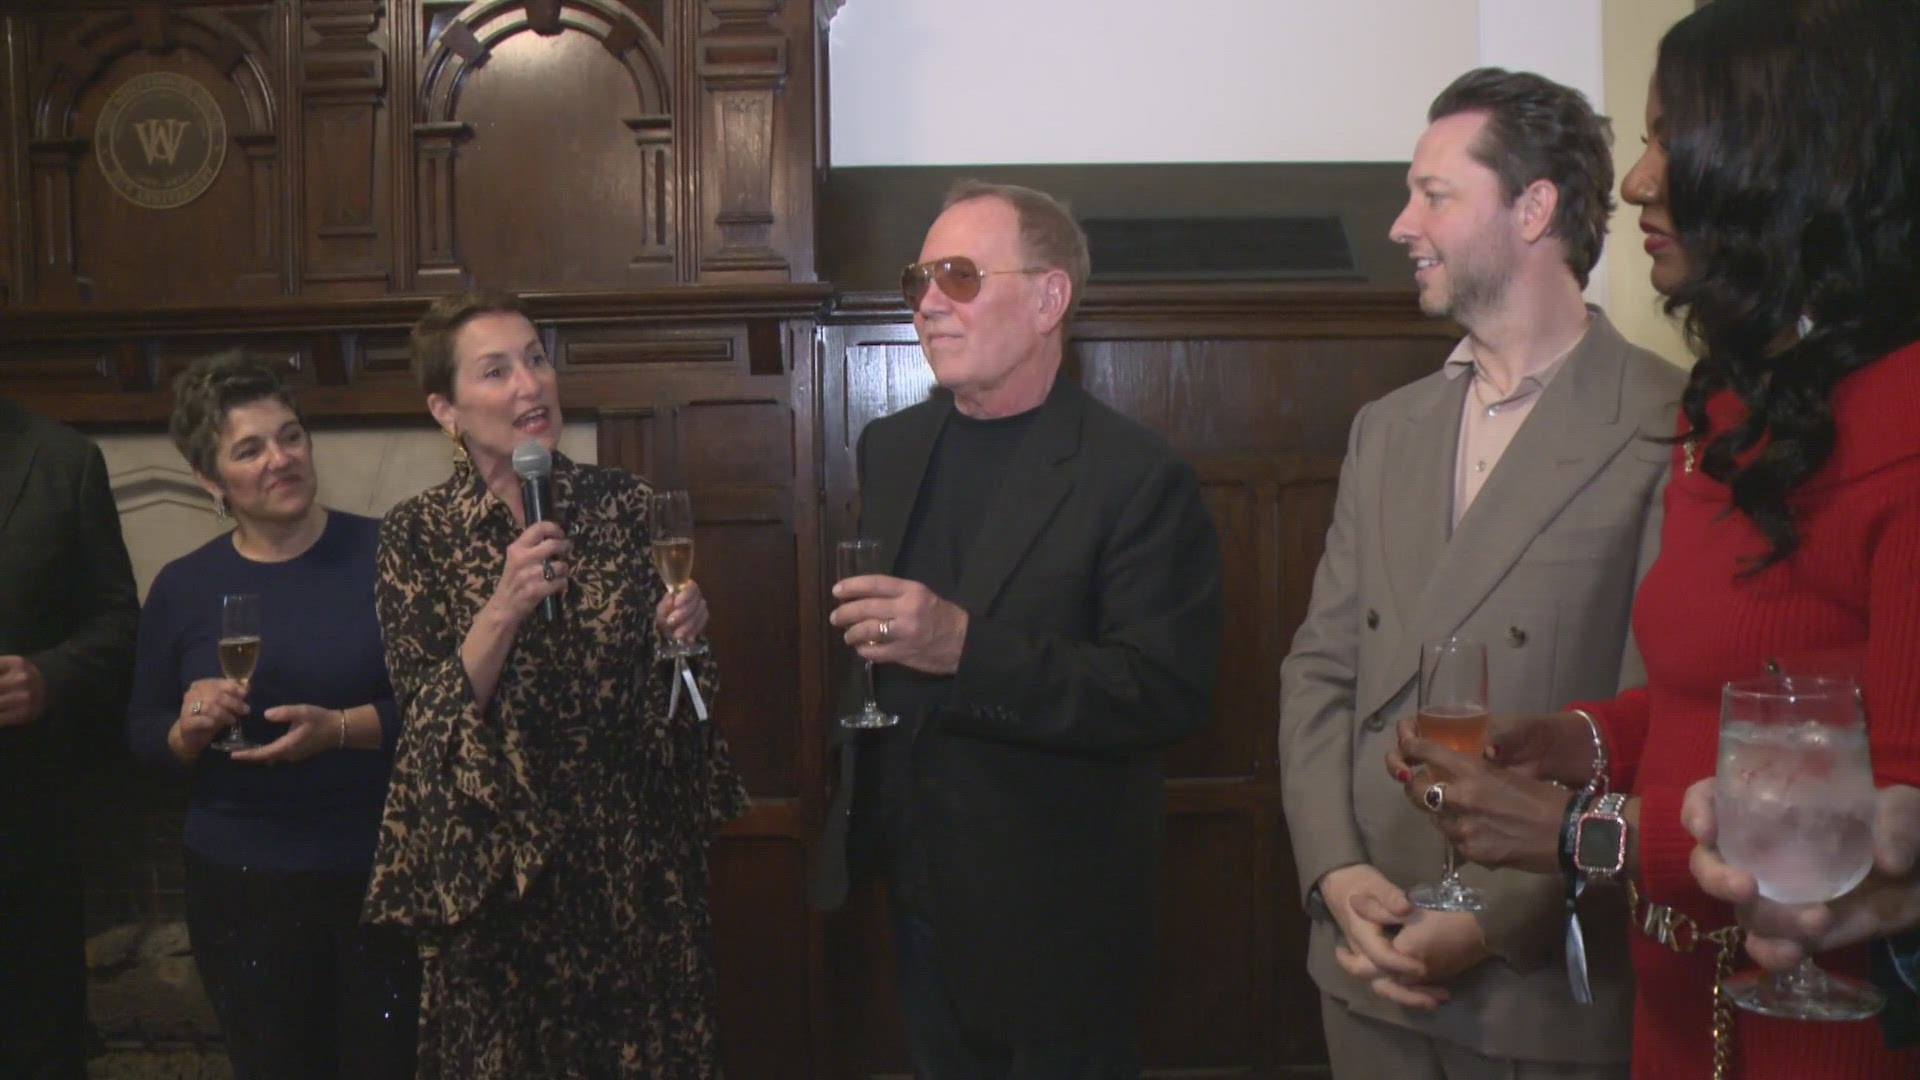 The St. Louis Fashion Fund is celebrating 10 years in operation. To mark the anniversary, designer Michael Kors visited with his husband, who is from Belleville.